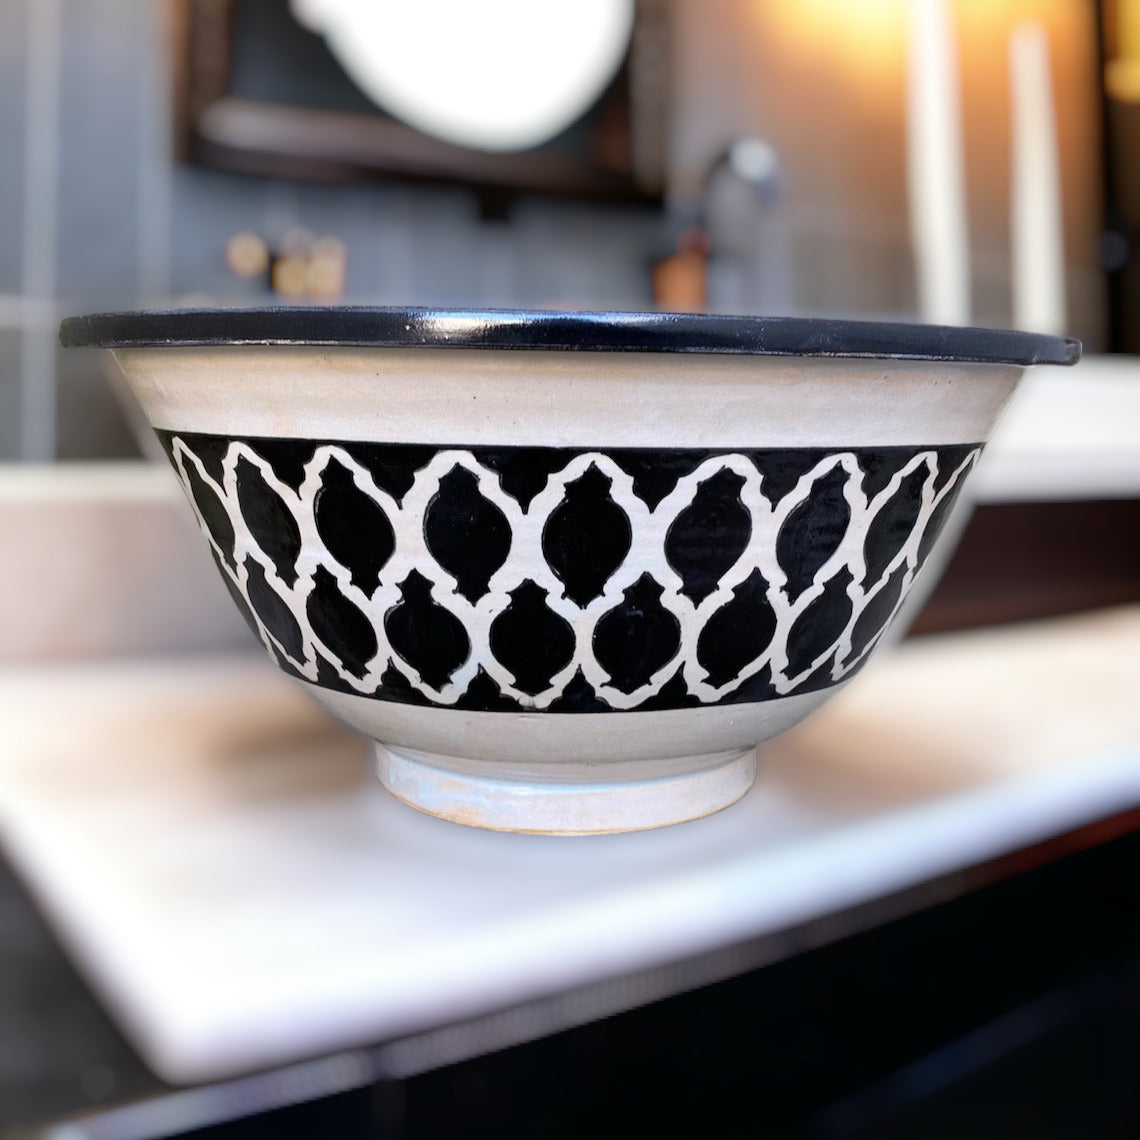 Moroccan sink | moroccan ceramic sink | bathroom sink | moroccan bathroom basin | moroccan sink bowl | Black and white sink bowl #45